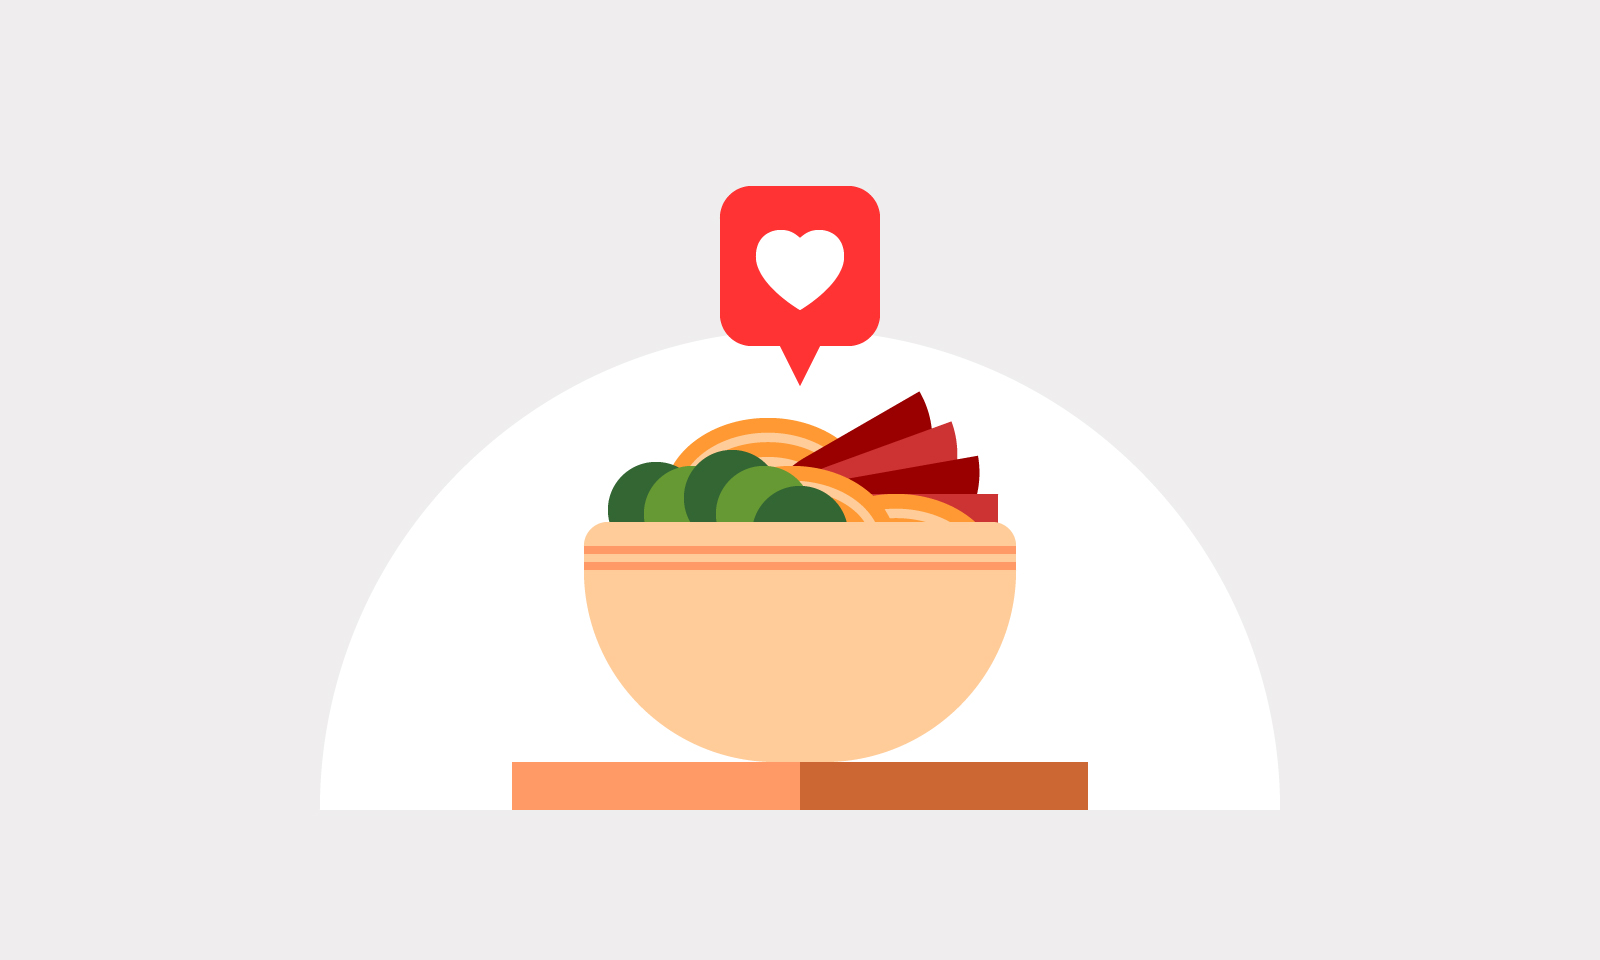 Illustration of a bowl of vegetables, meat and noodles with a heart icon above it